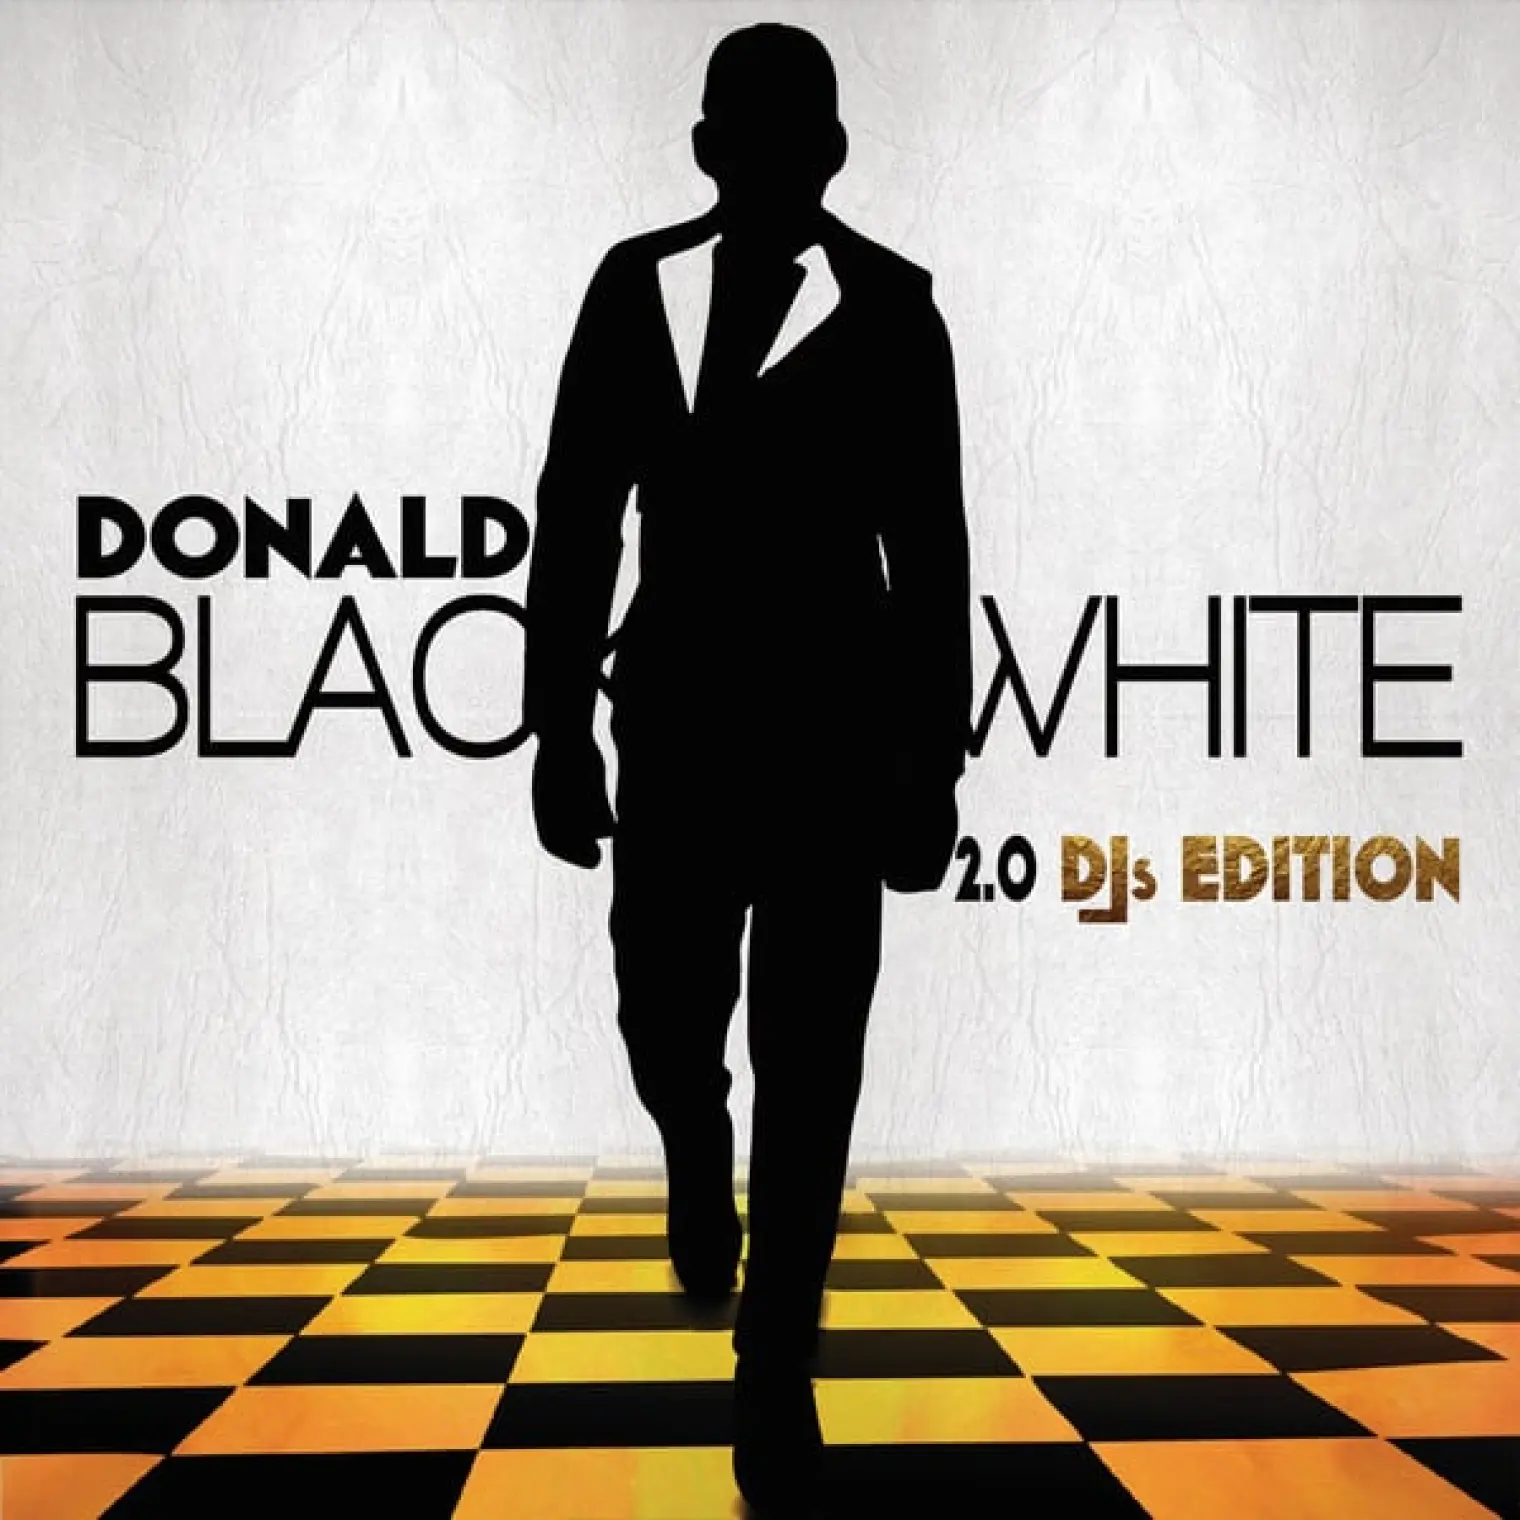 Black And White 2.0 -  Donald 